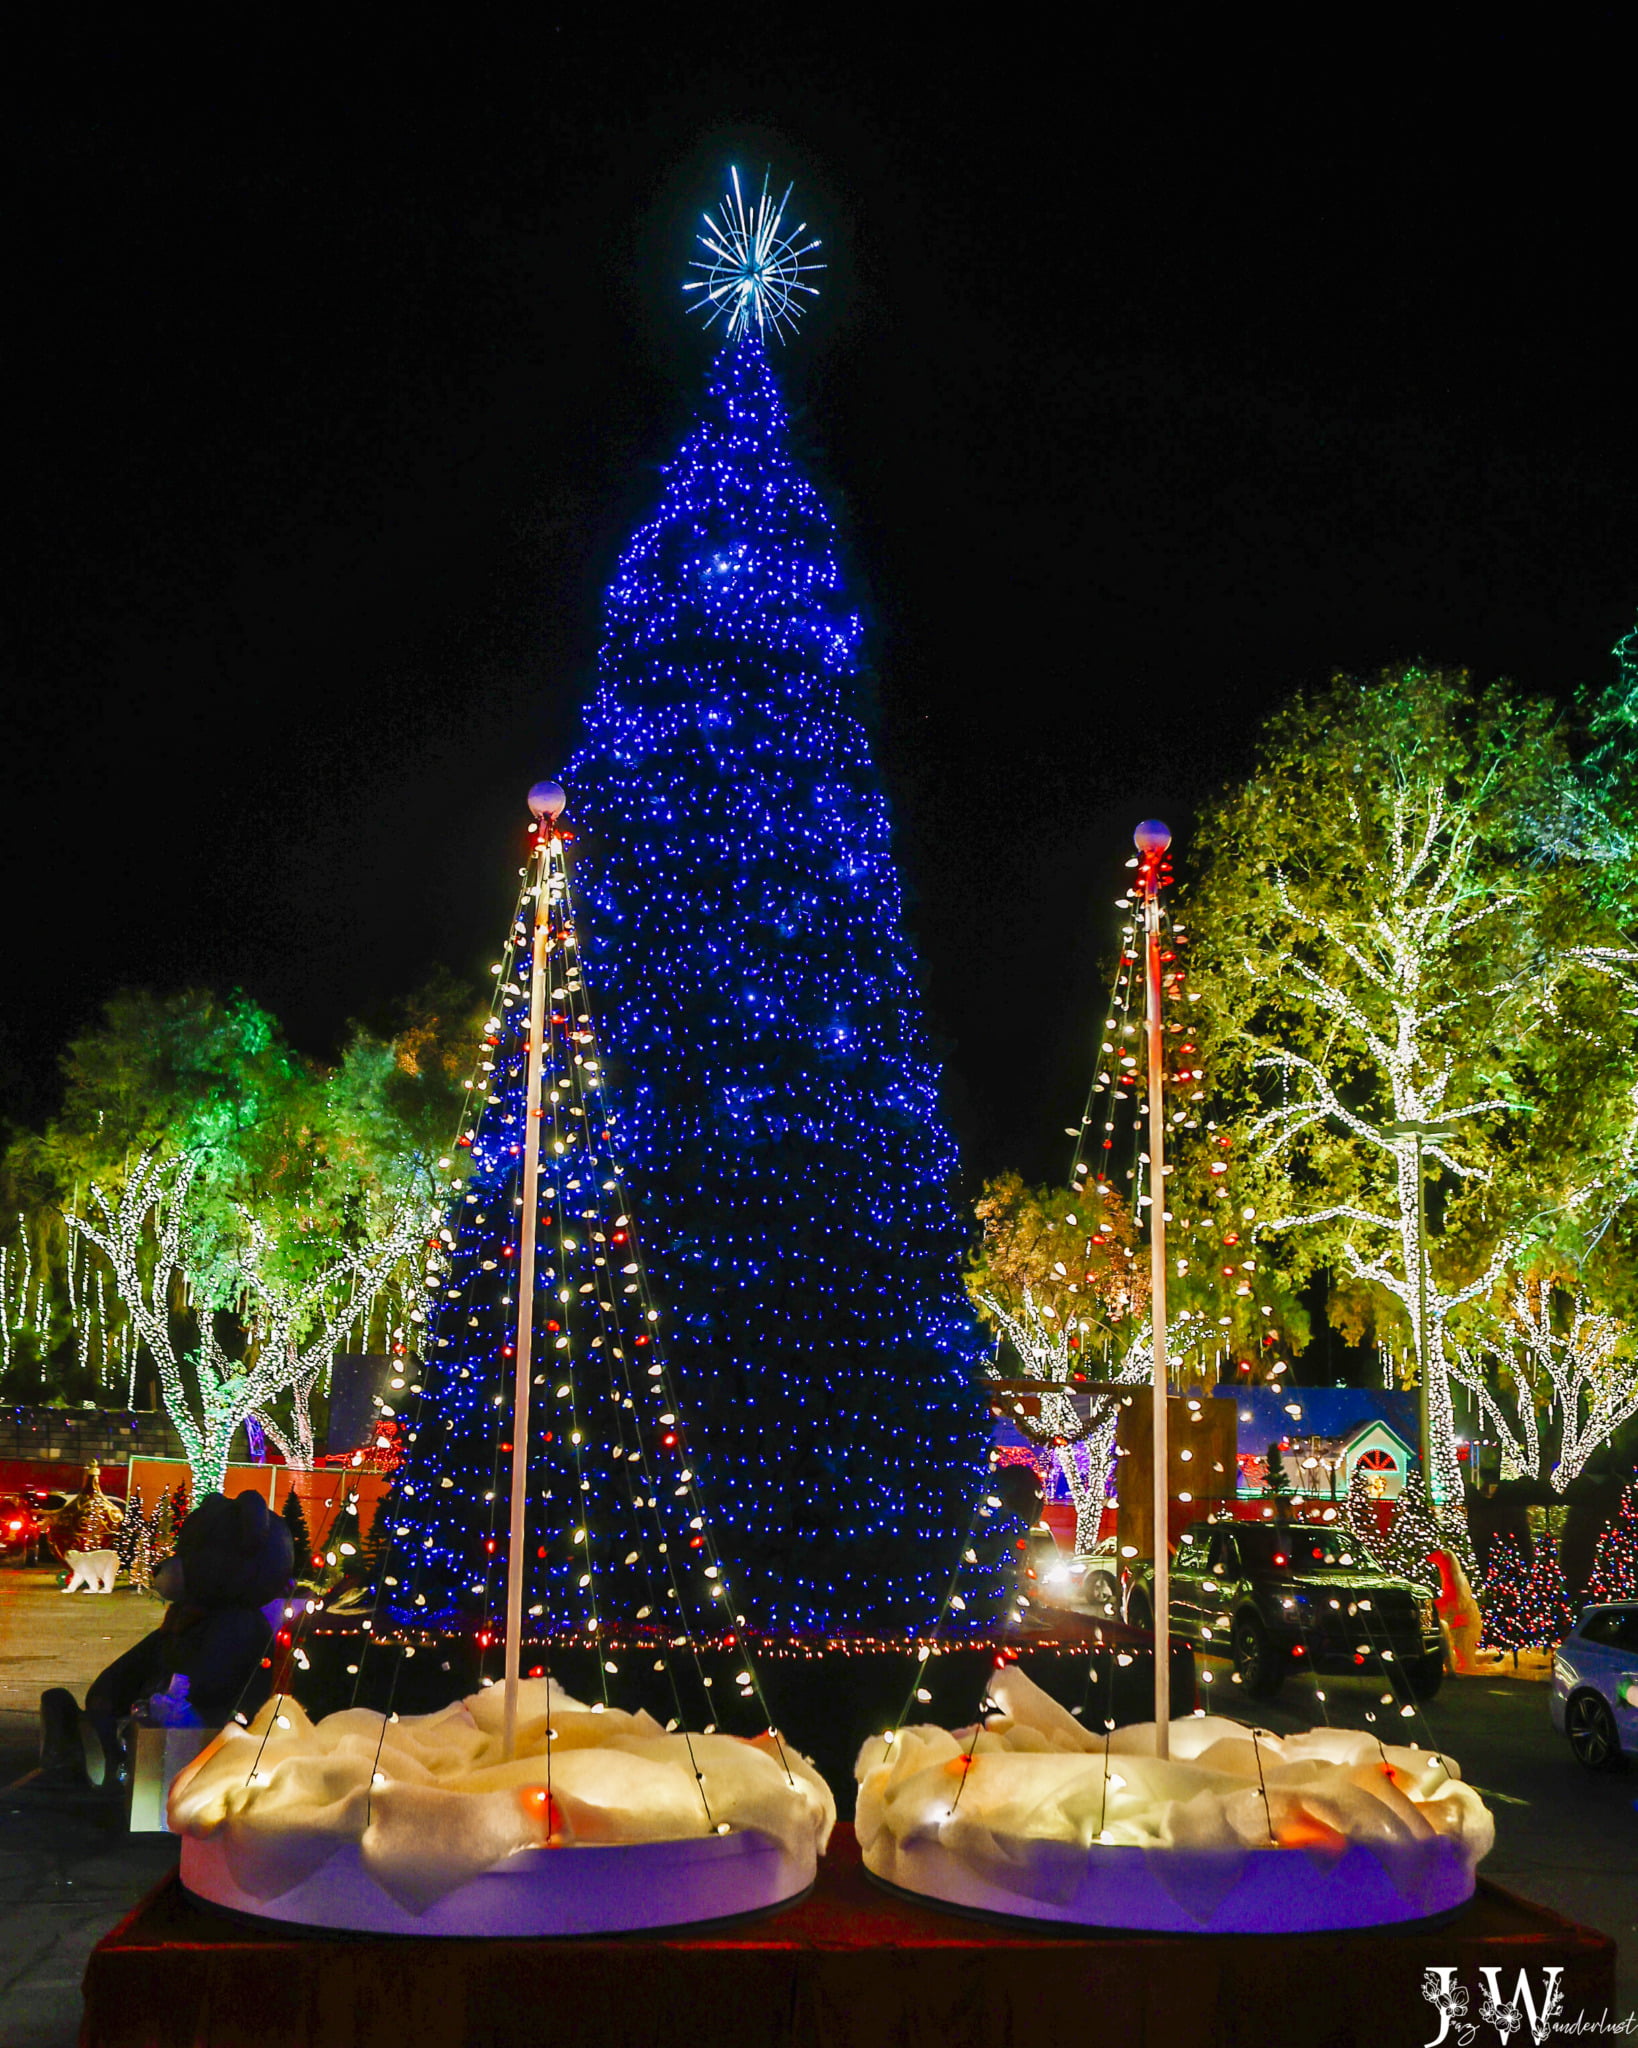 Christmas lights and decor in Southern California. Photography by Jaz Wanderlust.